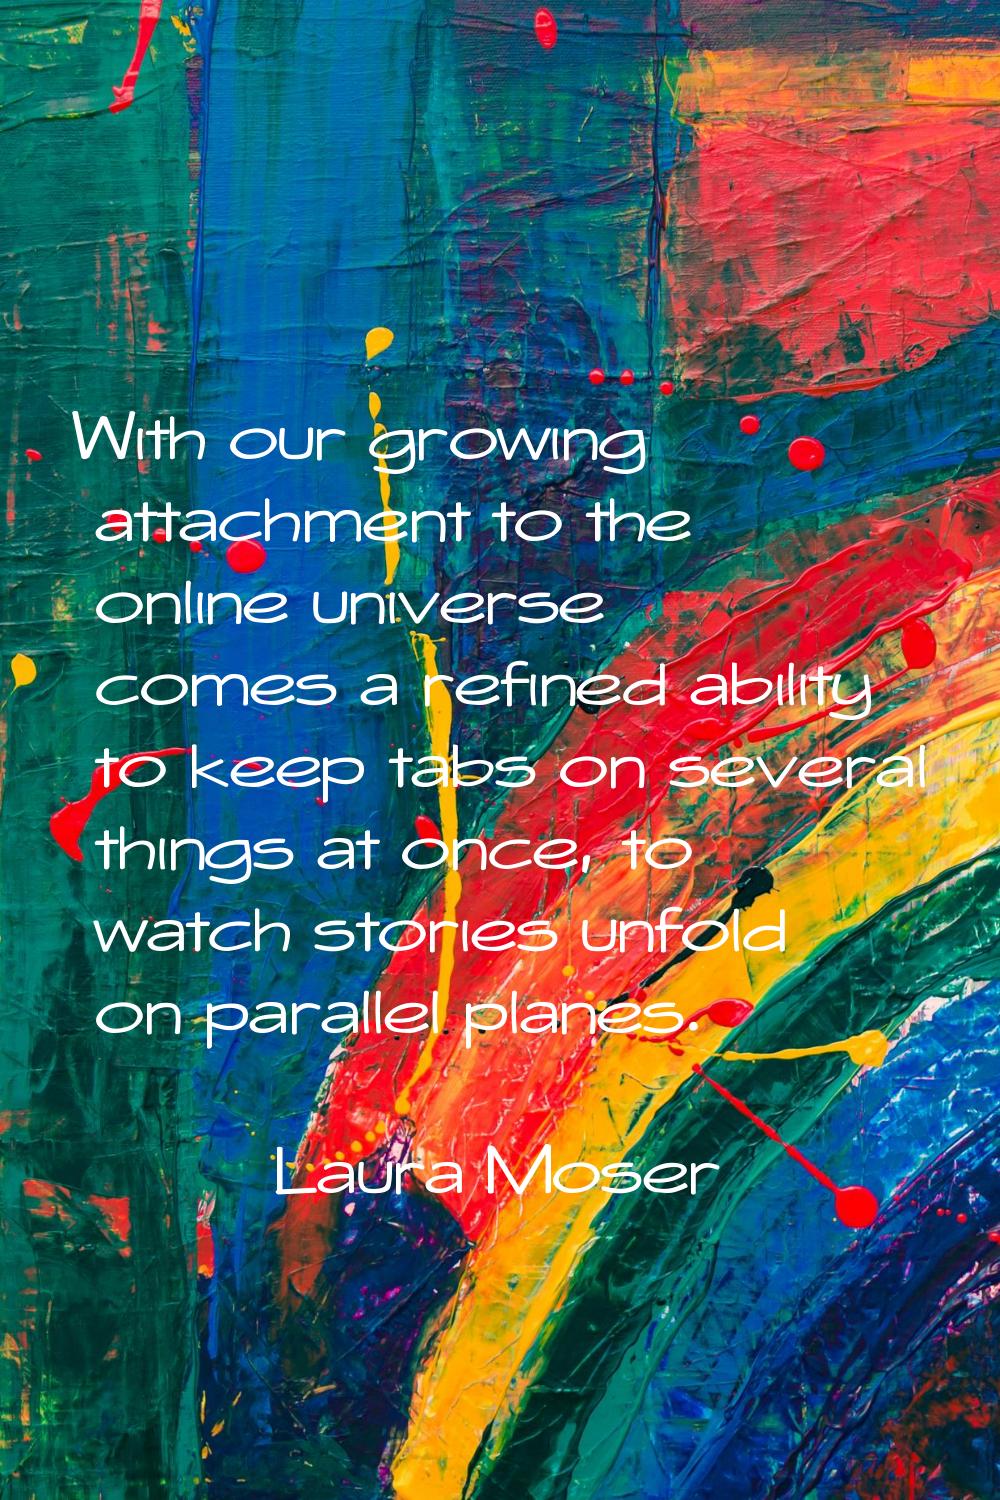 With our growing attachment to the online universe comes a refined ability to keep tabs on several 